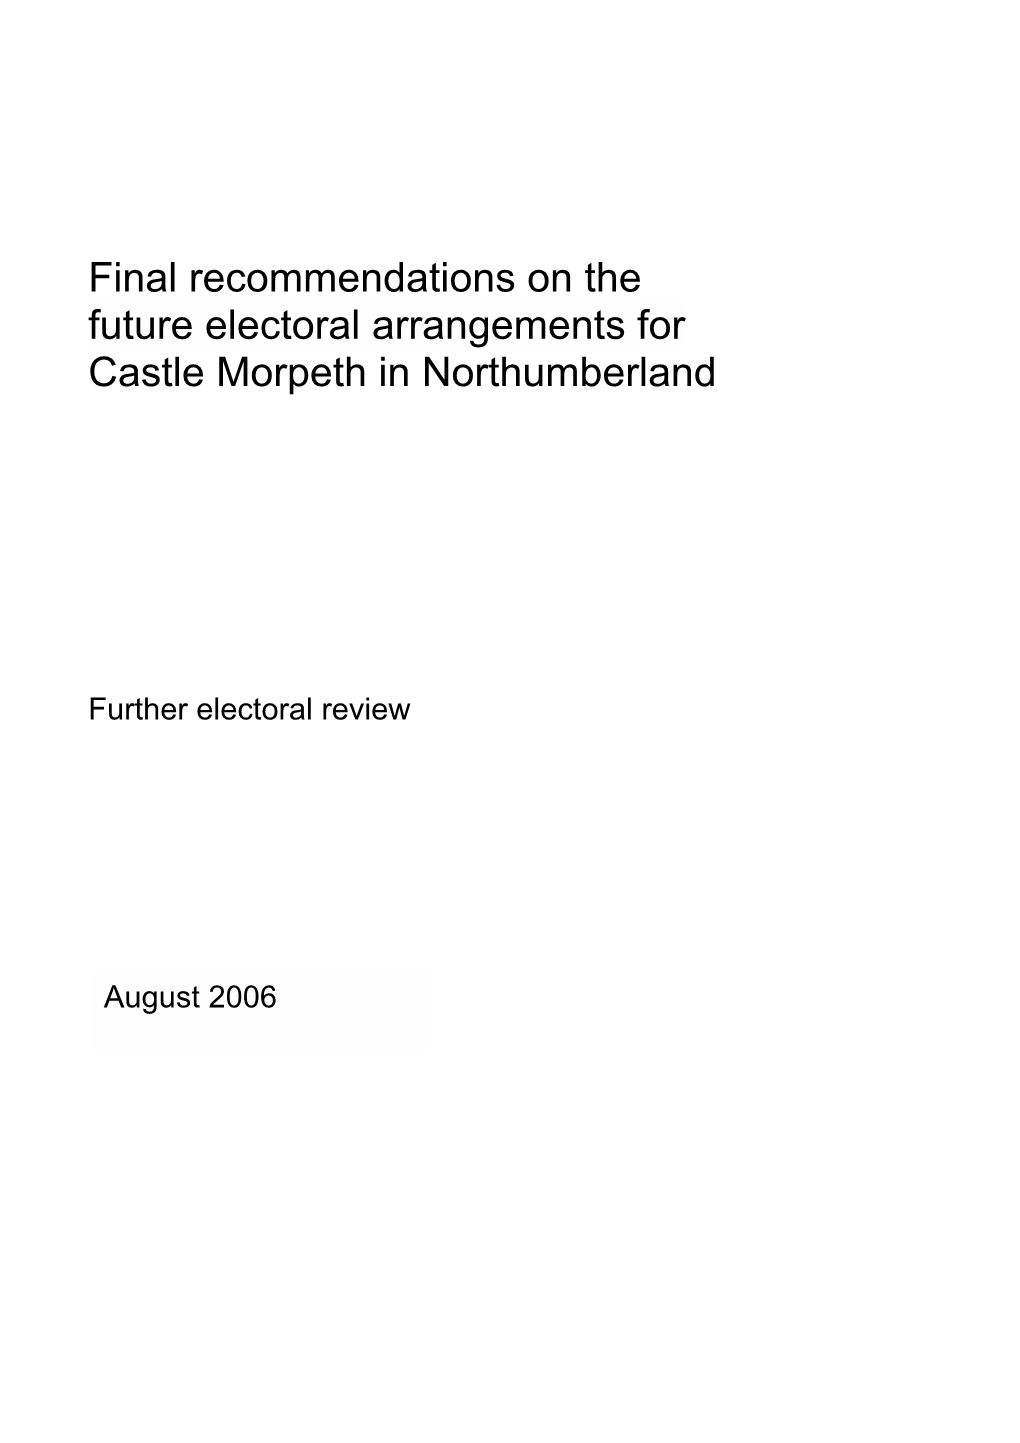 Final Recommendations on the Future Electoral Arrangements for Castle Morpeth in Northumberland